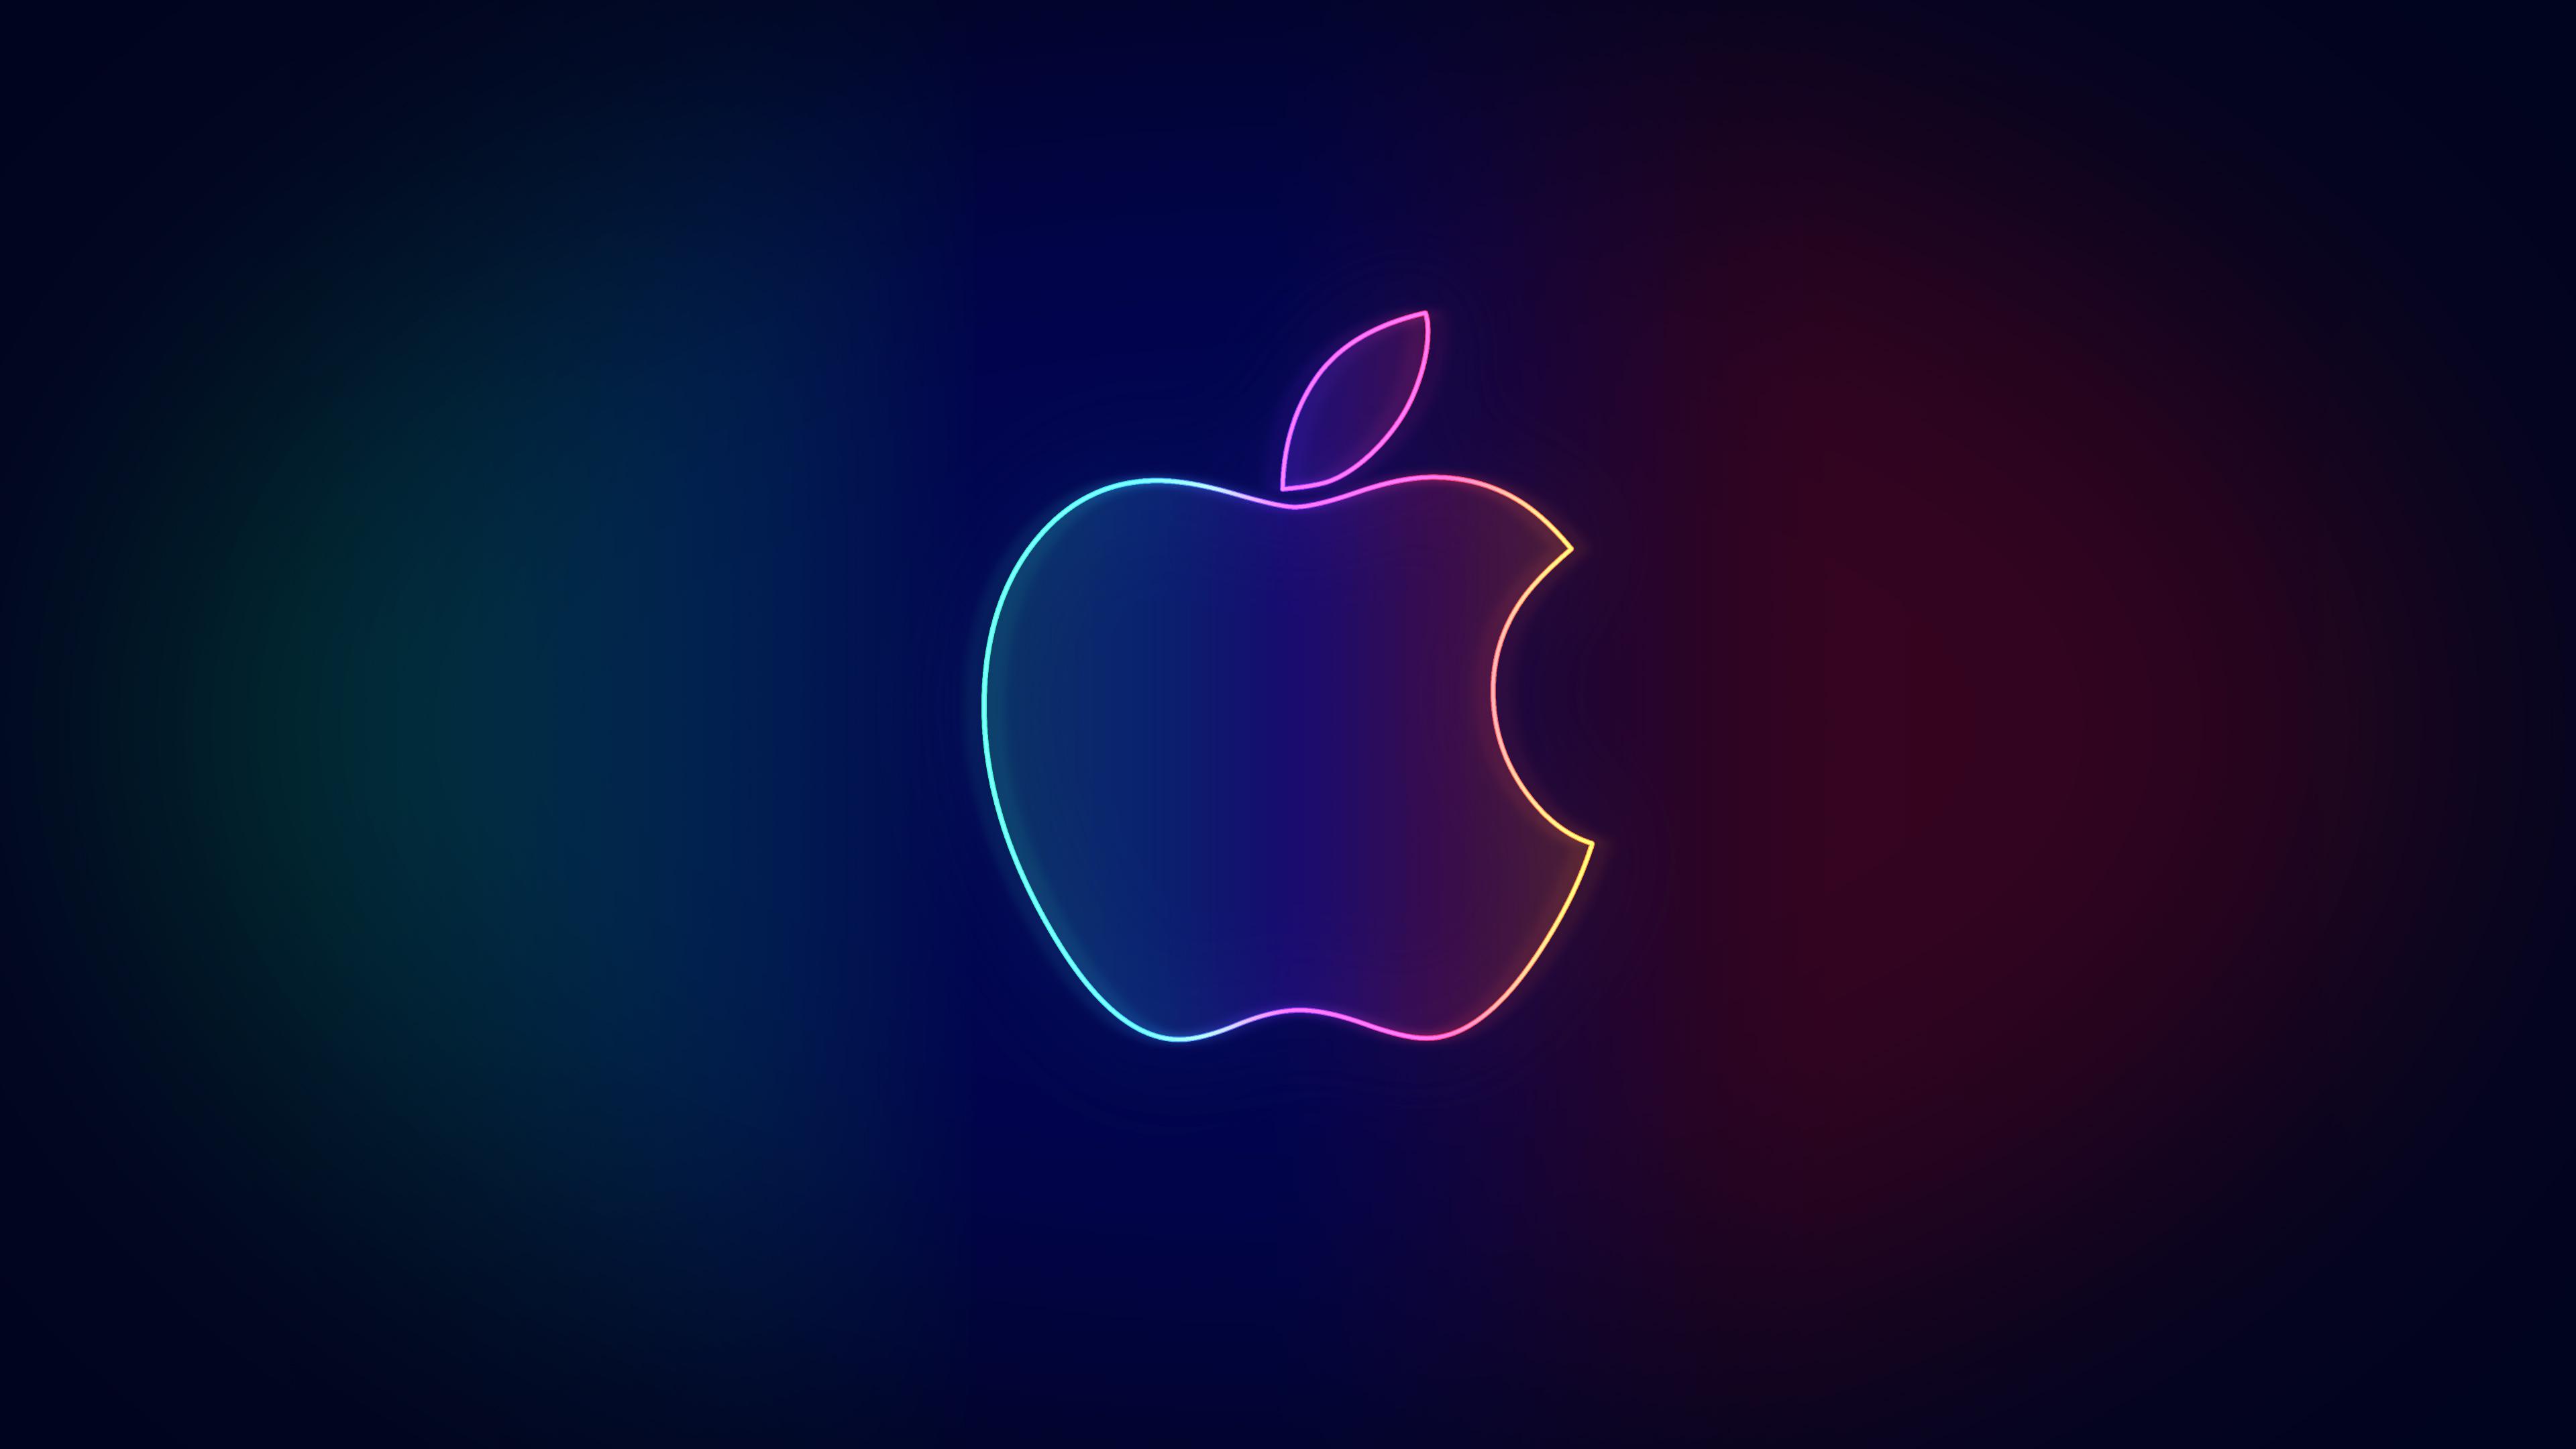 Apple 4K wallpaper for your desktop or mobile screen free and easy to download